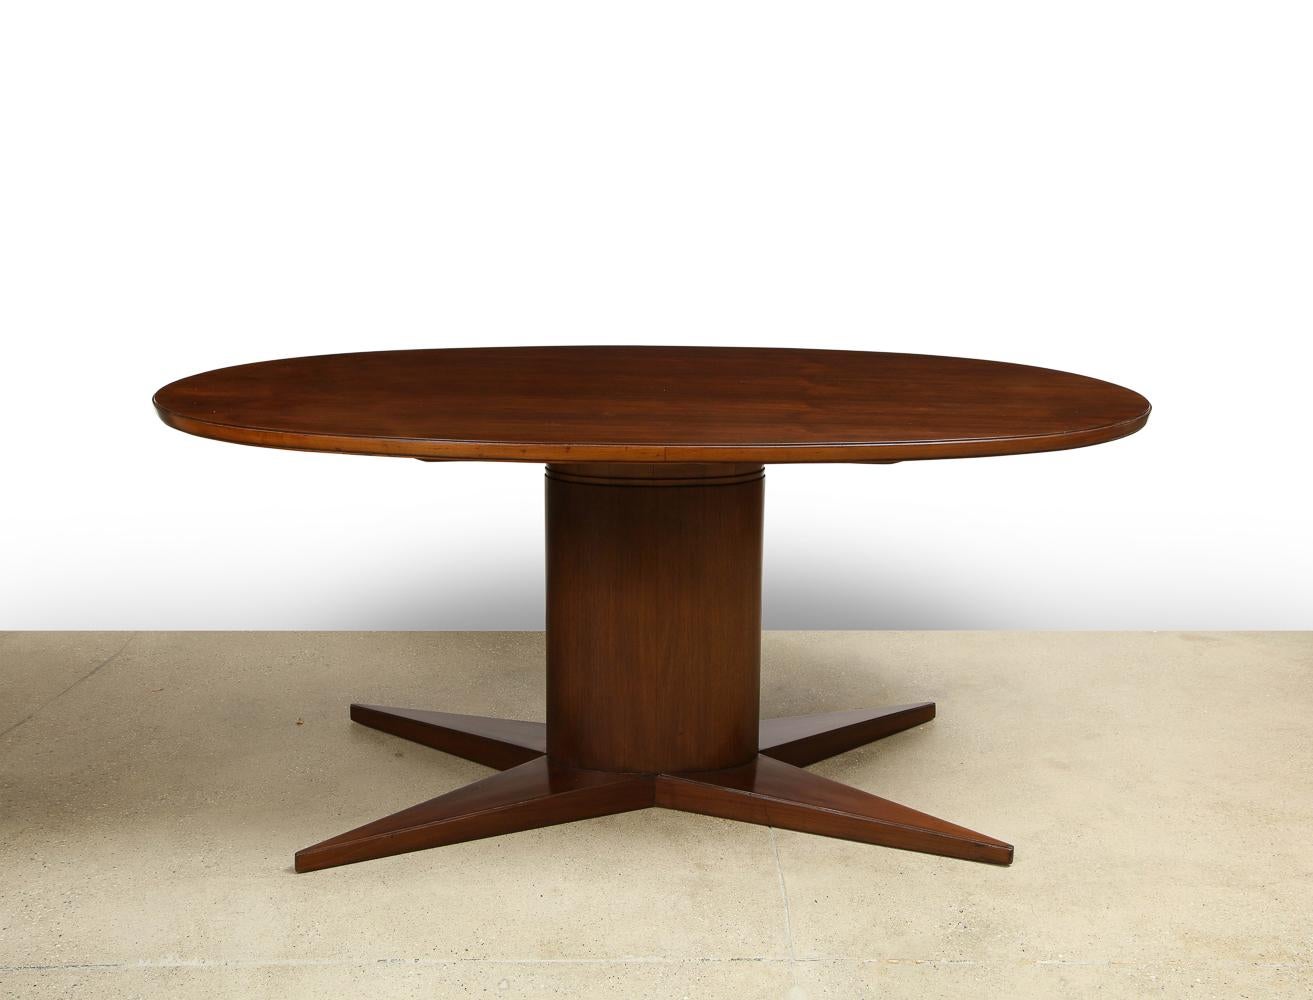 Rare & early dining table by Gio Ponti. An early Gio Ponti form in walnut, featuring an oval top, pedestal and 4-point-star shaped base. Wood has been refinished. *This table has been authenticated by the Gio Ponti Archives.